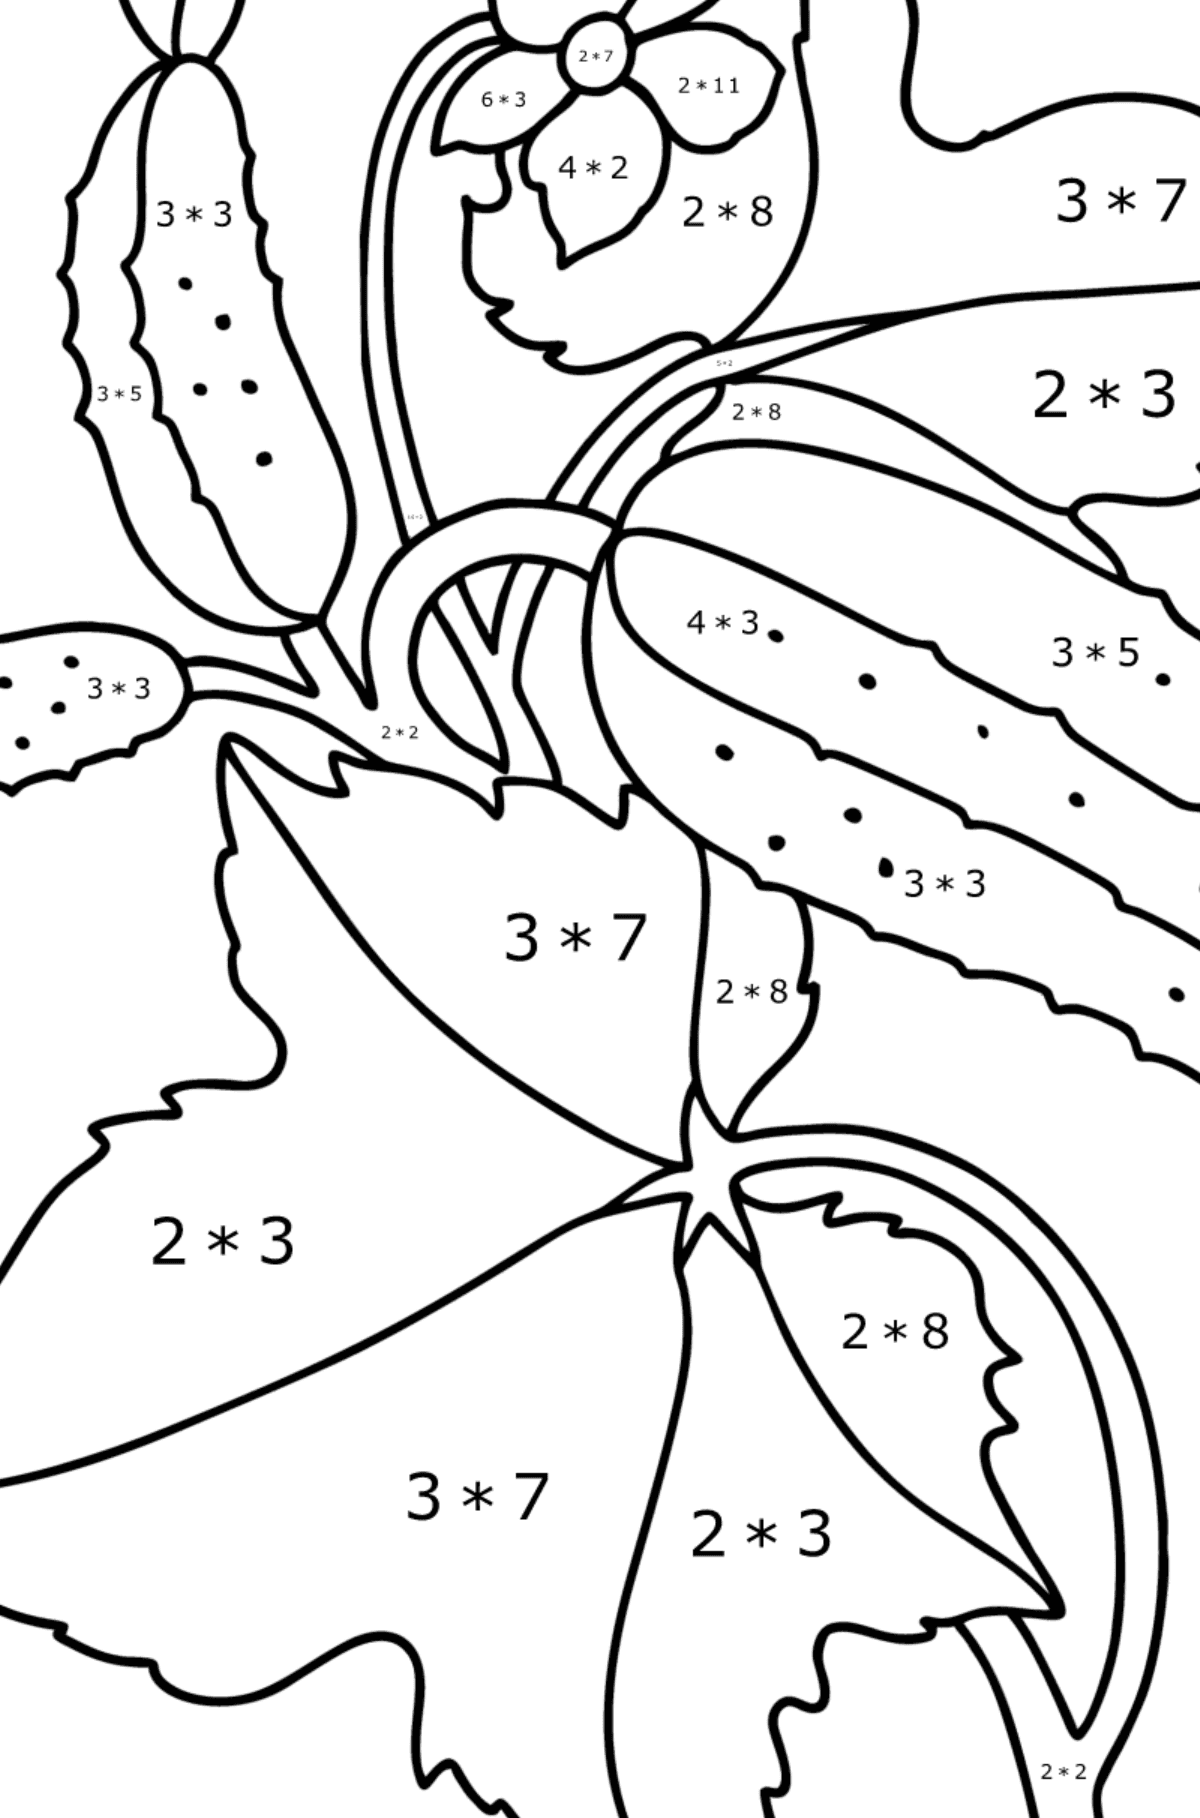 Cucumbers on a branch сoloring page - Math Coloring - Multiplication for Kids